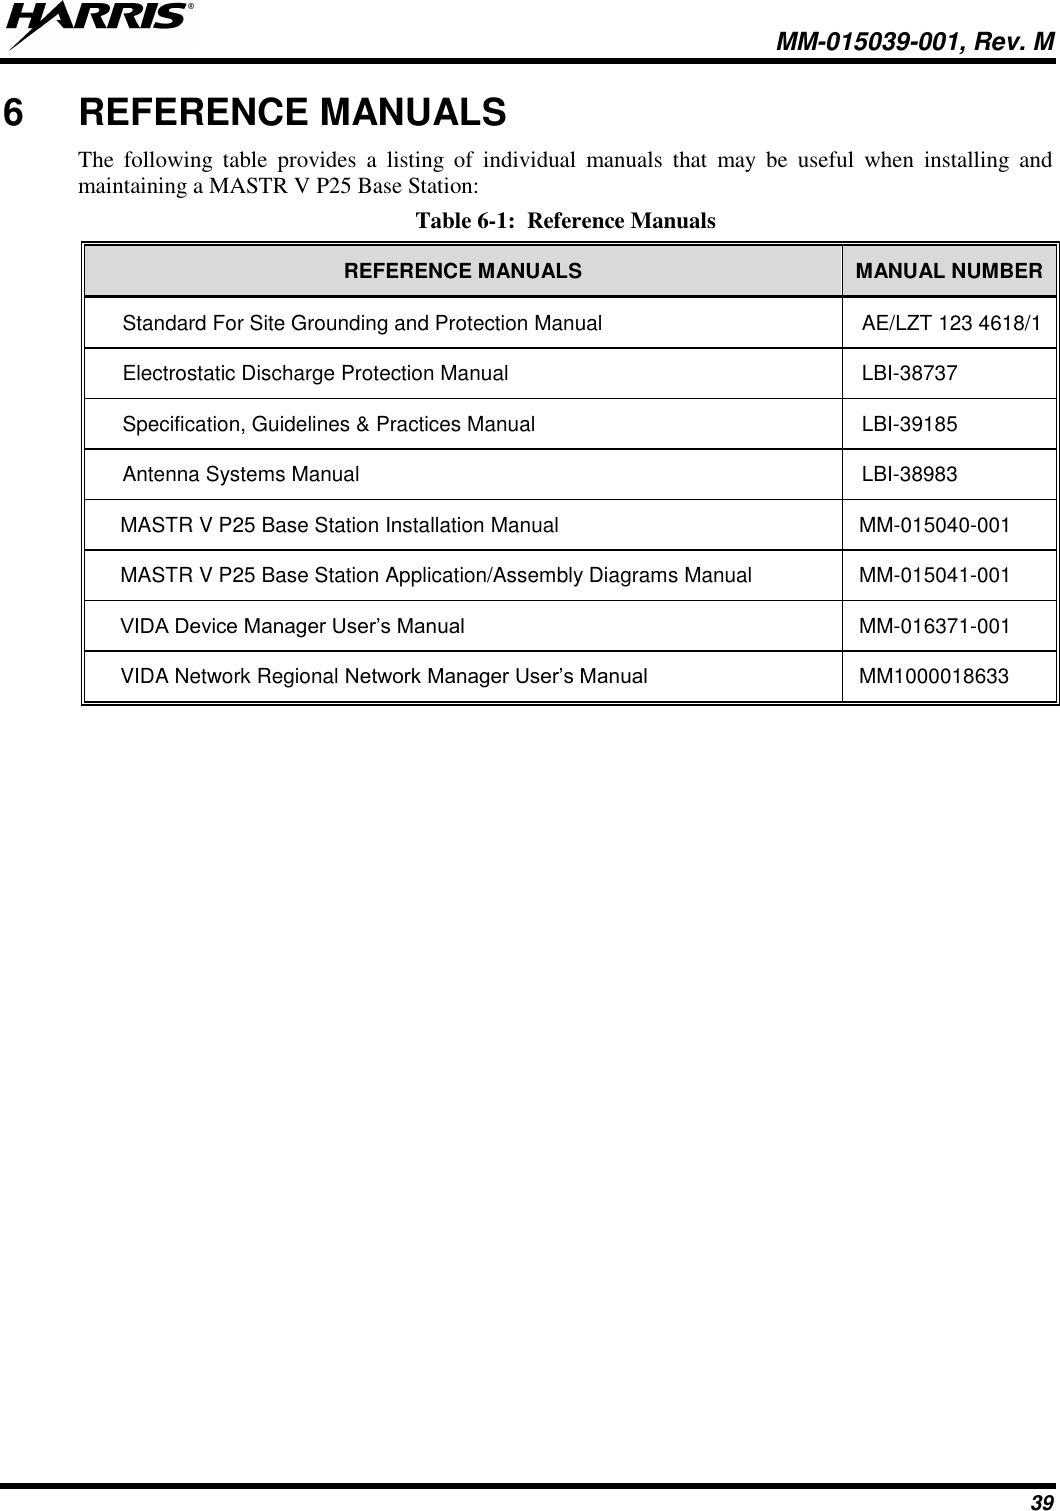   MM-015039-001, Rev. M 39 6  REFERENCE MANUALS The  following  table  provides  a  listing  of  individual  manuals  that  may  be  useful  when  installing  and maintaining a MASTR V P25 Base Station: Table 6-1:  Reference Manuals REFERENCE MANUALS MANUAL NUMBER Standard For Site Grounding and Protection Manual AE/LZT 123 4618/1 Electrostatic Discharge Protection Manual LBI-38737 Specification, Guidelines &amp; Practices Manual LBI-39185 Antenna Systems Manual LBI-38983 MASTR V P25 Base Station Installation Manual MM-015040-001 MASTR V P25 Base Station Application/Assembly Diagrams Manual MM-015041-001 VIDA Device Manager User’s Manual MM-016371-001 VIDA Network Regional Network Manager User’s Manual MM1000018633  